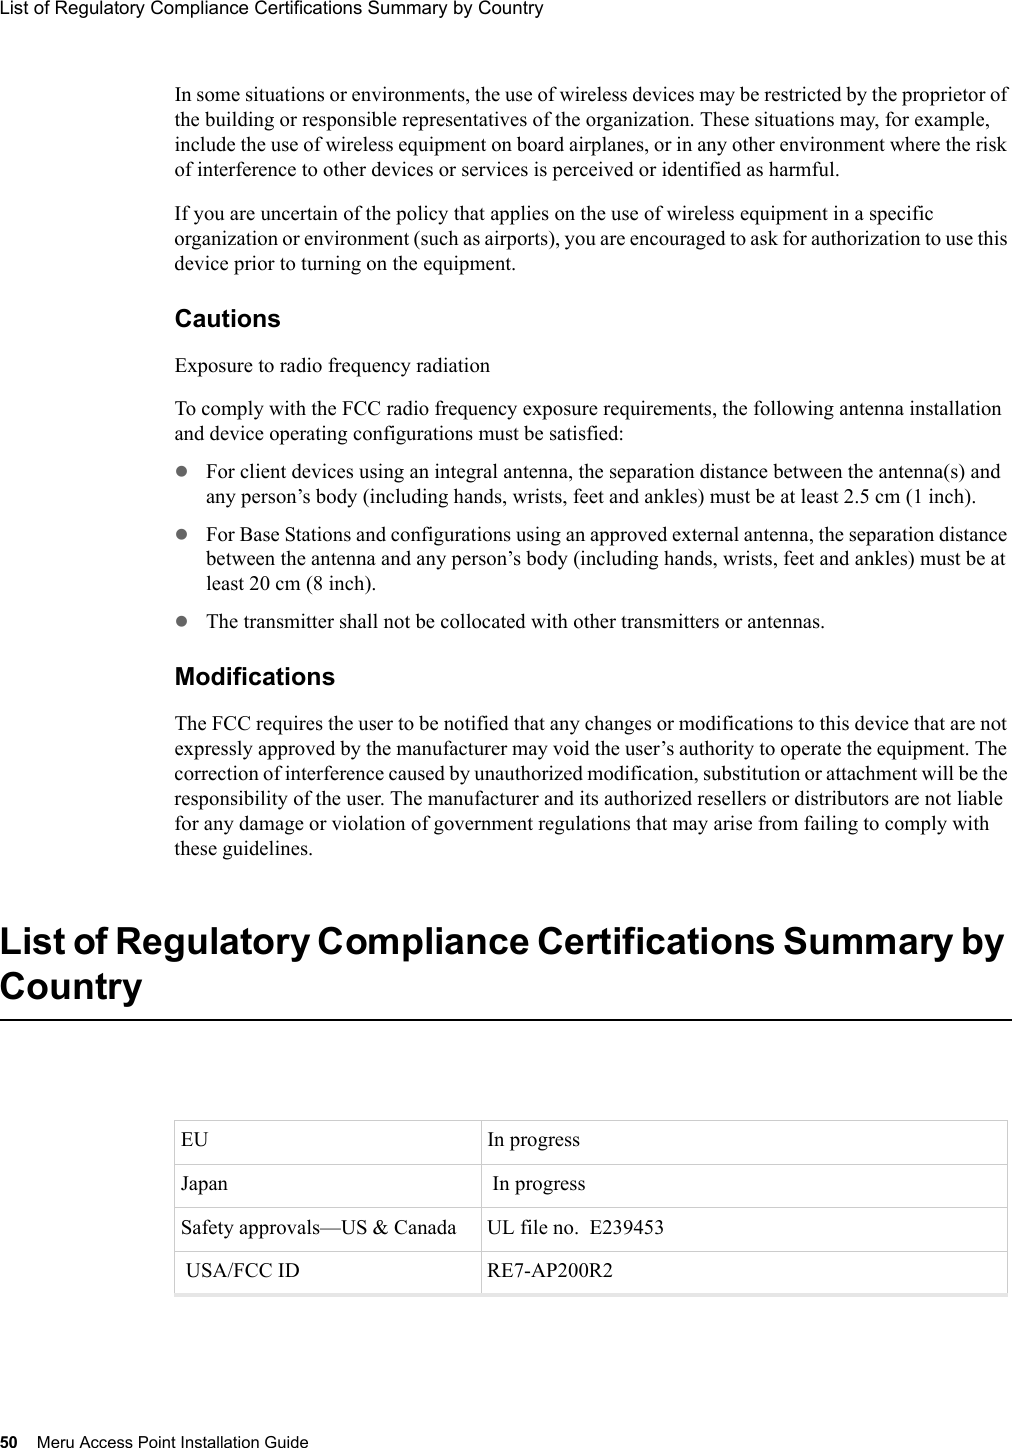 50 Meru Access Point Installation GuideList of Regulatory Compliance Certifications Summary by Country In some situations or environments, the use of wireless devices may be restricted by the proprietor of the building or responsible representatives of the organization. These situations may, for example, include the use of wireless equipment on board airplanes, or in any other environment where the risk of interference to other devices or services is perceived or identified as harmful. If you are uncertain of the policy that applies on the use of wireless equipment in a specific organization or environment (such as airports), you are encouraged to ask for authorization to use this device prior to turning on the equipment. CautionsExposure to radio frequency radiationTo comply with the FCC radio frequency exposure requirements, the following antenna installation and device operating configurations must be satisfied:zFor client devices using an integral antenna, the separation distance between the antenna(s) and any person’s body (including hands, wrists, feet and ankles) must be at least 2.5 cm (1 inch).zFor Base Stations and configurations using an approved external antenna, the separation distance between the antenna and any person’s body (including hands, wrists, feet and ankles) must be at least 20 cm (8 inch). zThe transmitter shall not be collocated with other transmitters or antennas.Modifications The FCC requires the user to be notified that any changes or modifications to this device that are not expressly approved by the manufacturer may void the user’s authority to operate the equipment. The correction of interference caused by unauthorized modification, substitution or attachment will be the responsibility of the user. The manufacturer and its authorized resellers or distributors are not liable for any damage or violation of government regulations that may arise from failing to comply with these guidelines.List of Regulatory Compliance Certifications Summary by CountryEU In progress Japan  In progressSafety approvals—US &amp; Canada  UL file no.  E239453 USA/FCC ID  RE7-AP200R2